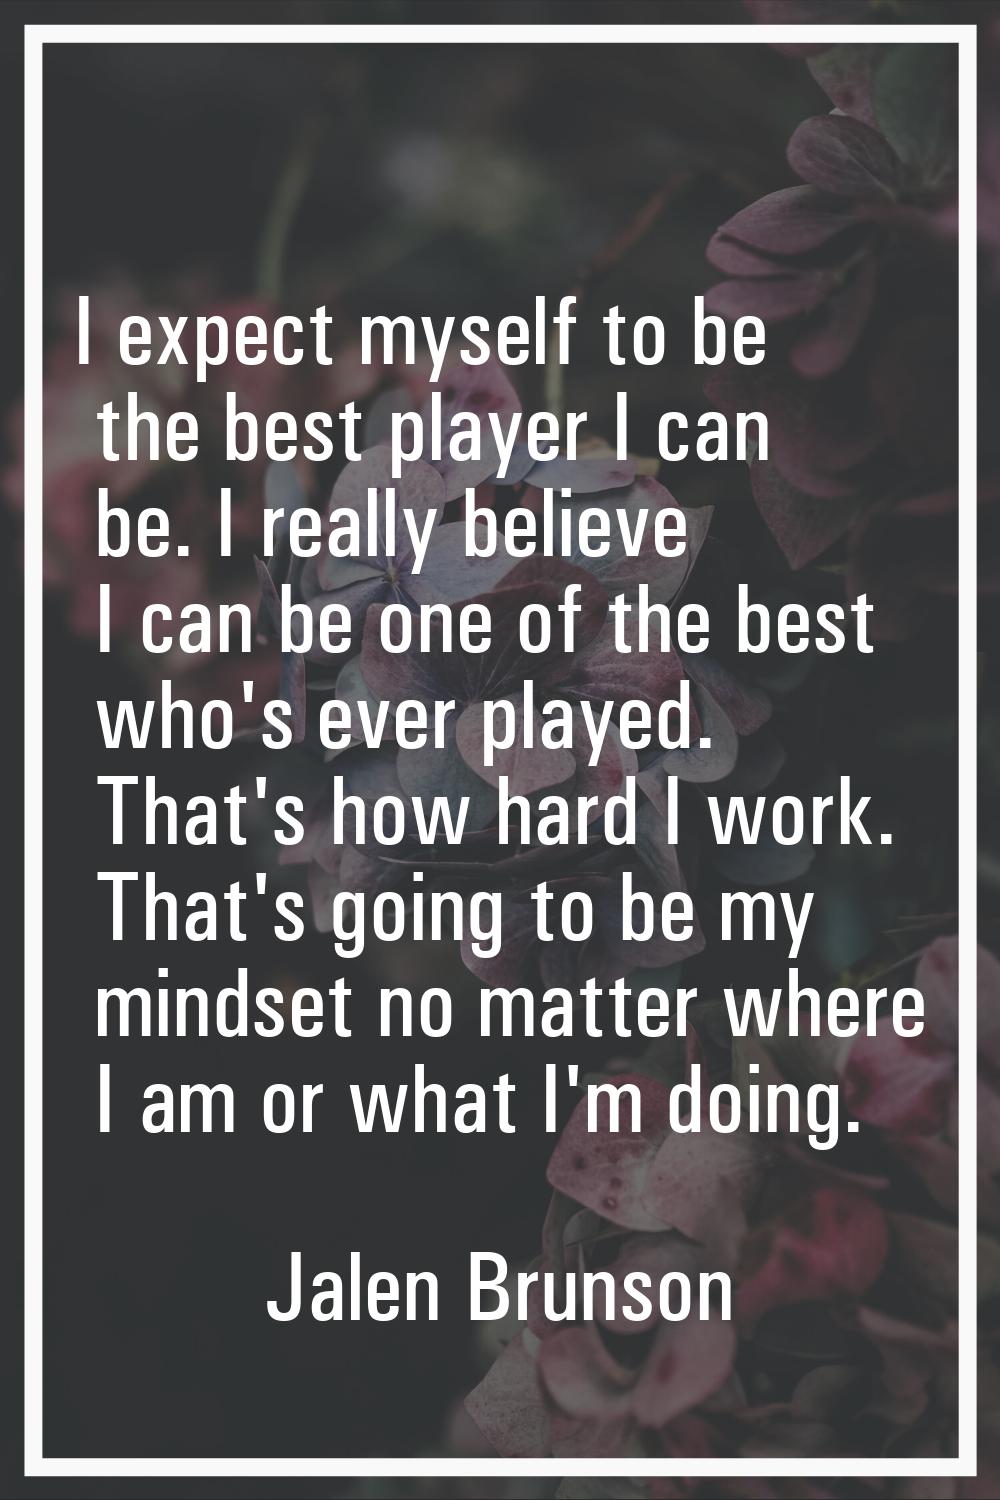 I expect myself to be the best player I can be. I really believe I can be one of the best who's eve